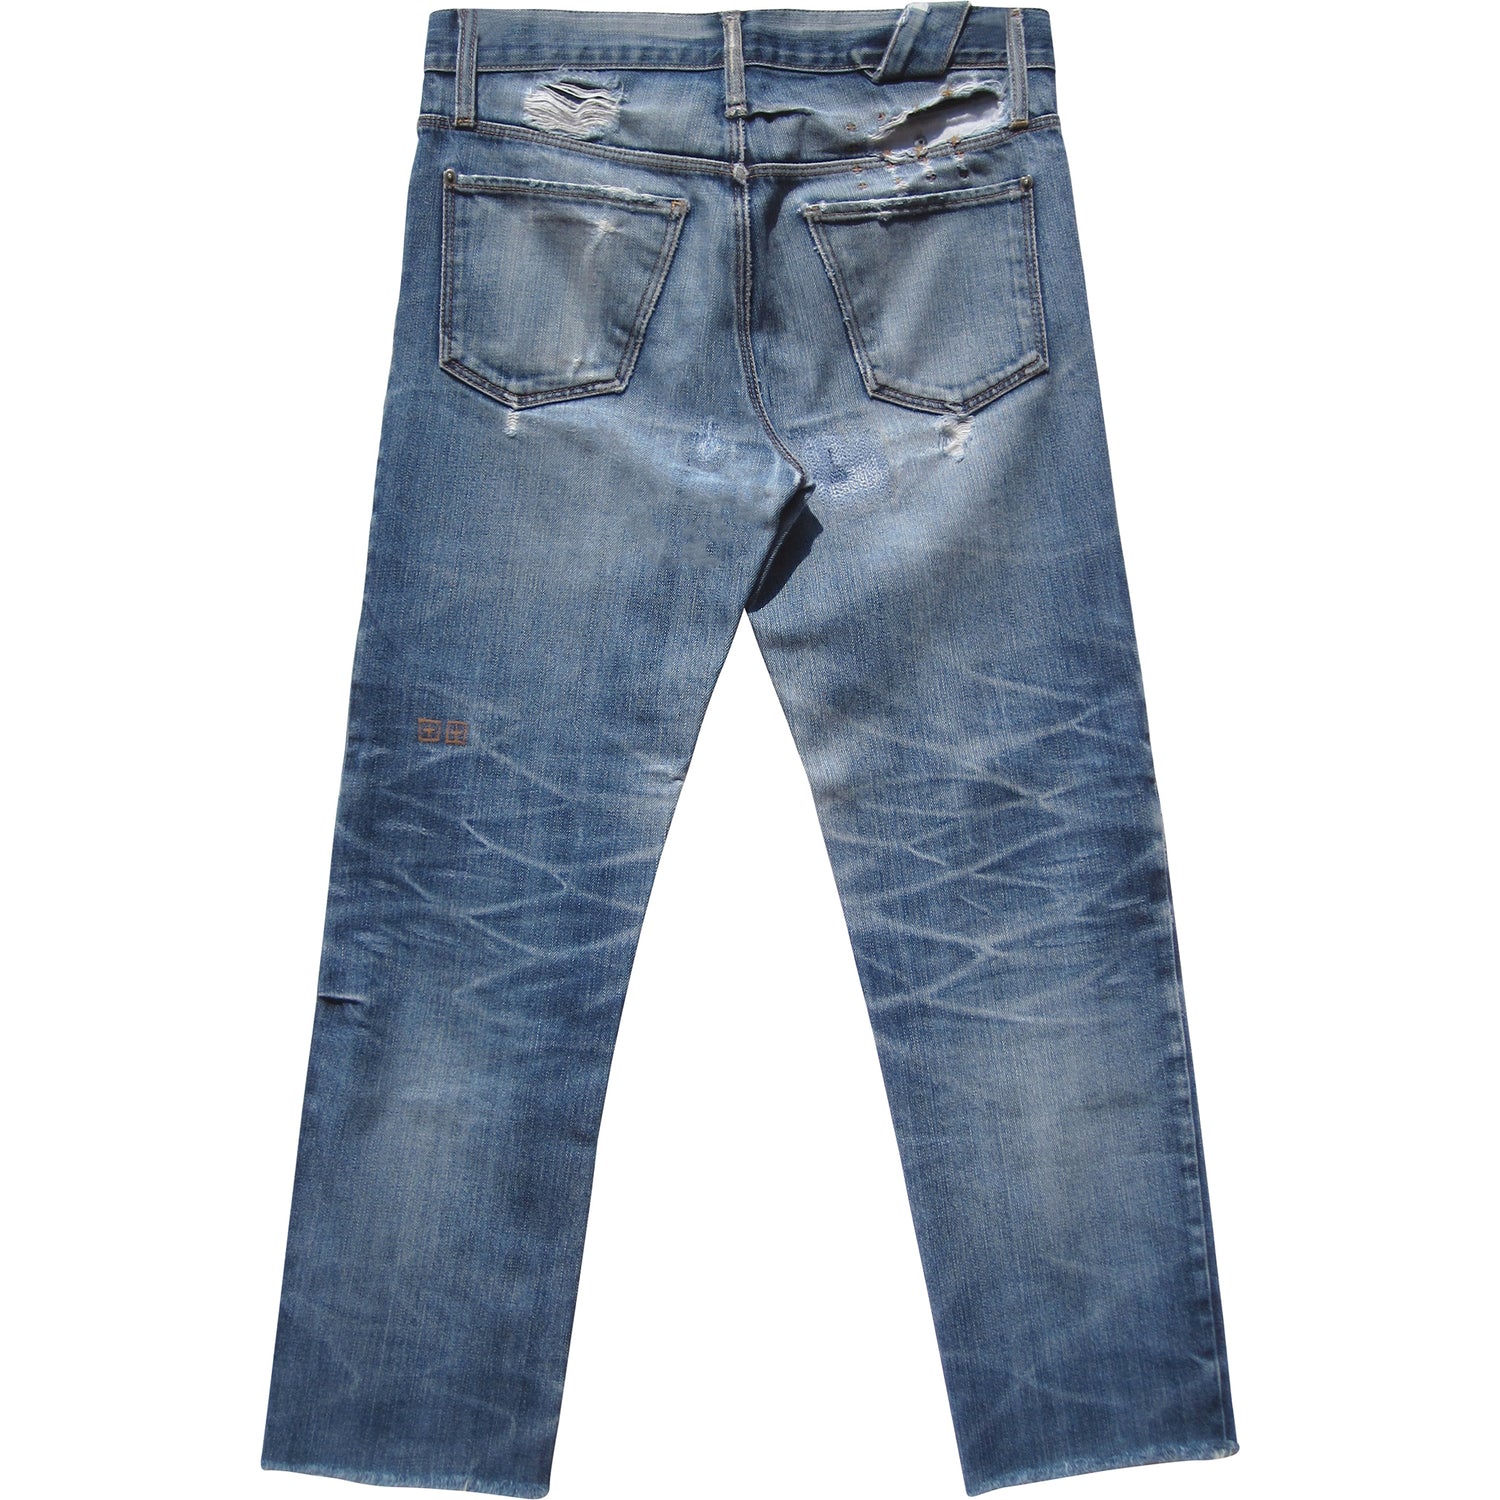 BEAT TO HELL KSUBI JEANS - SIZE 30